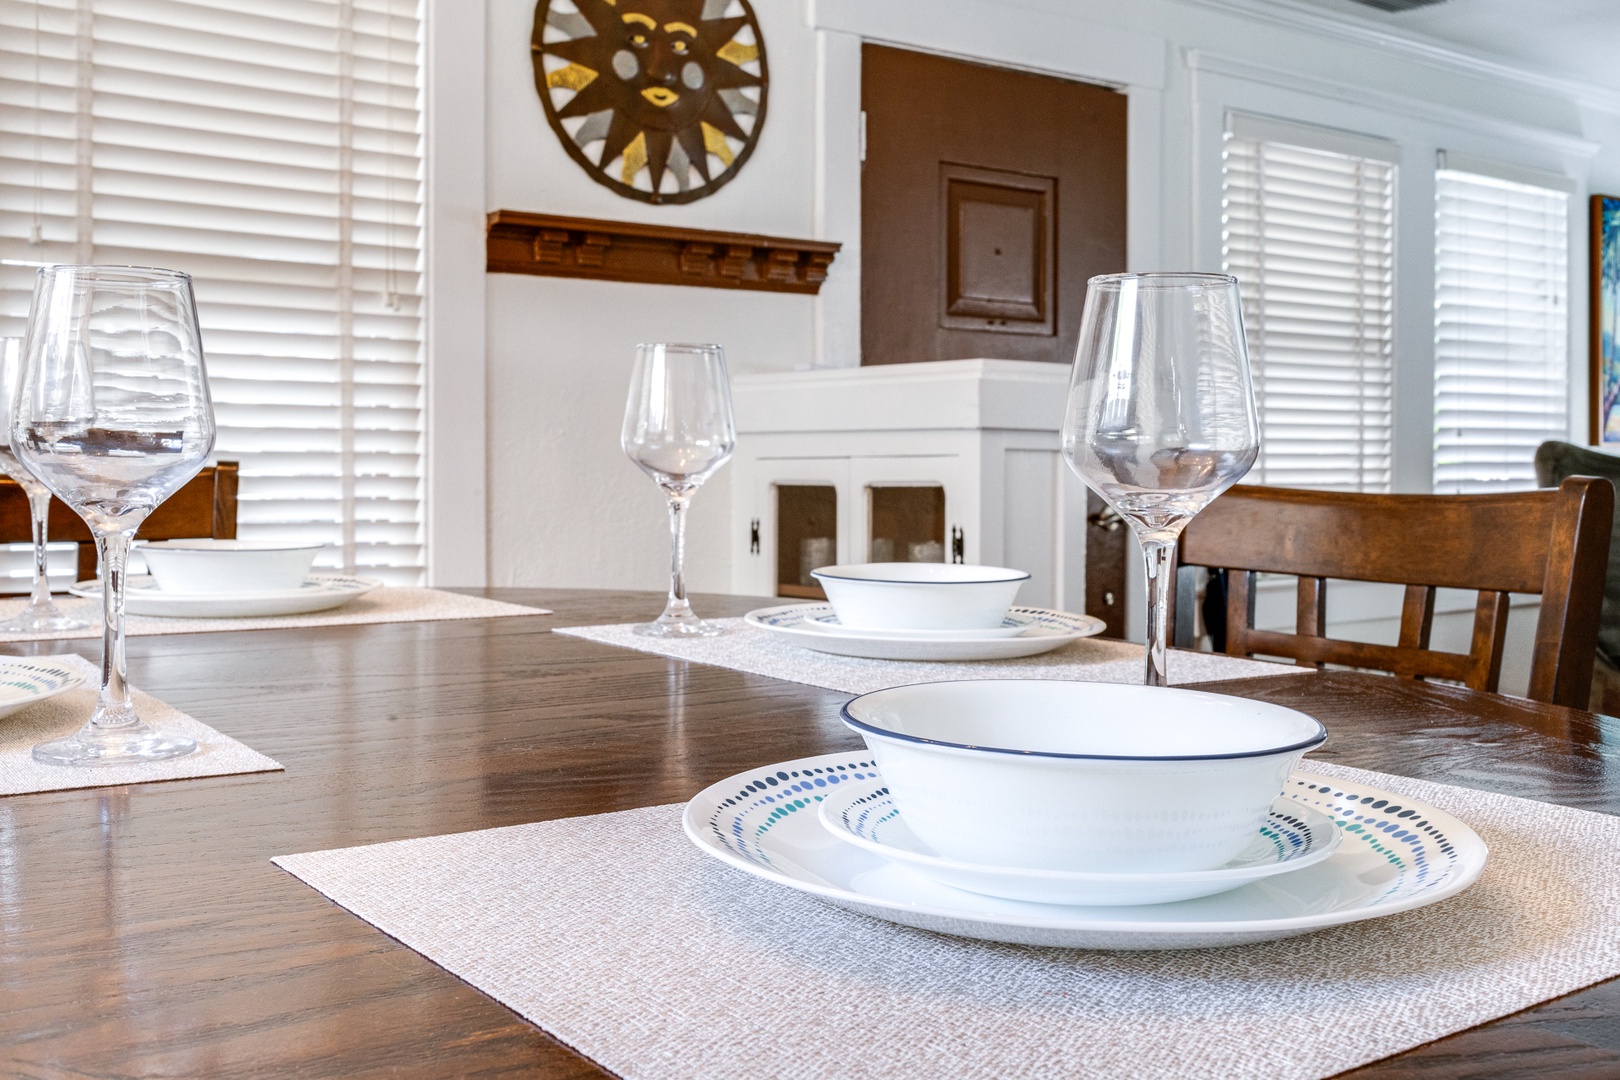 Gather for elegant meals together at the dining table, with seating for 4